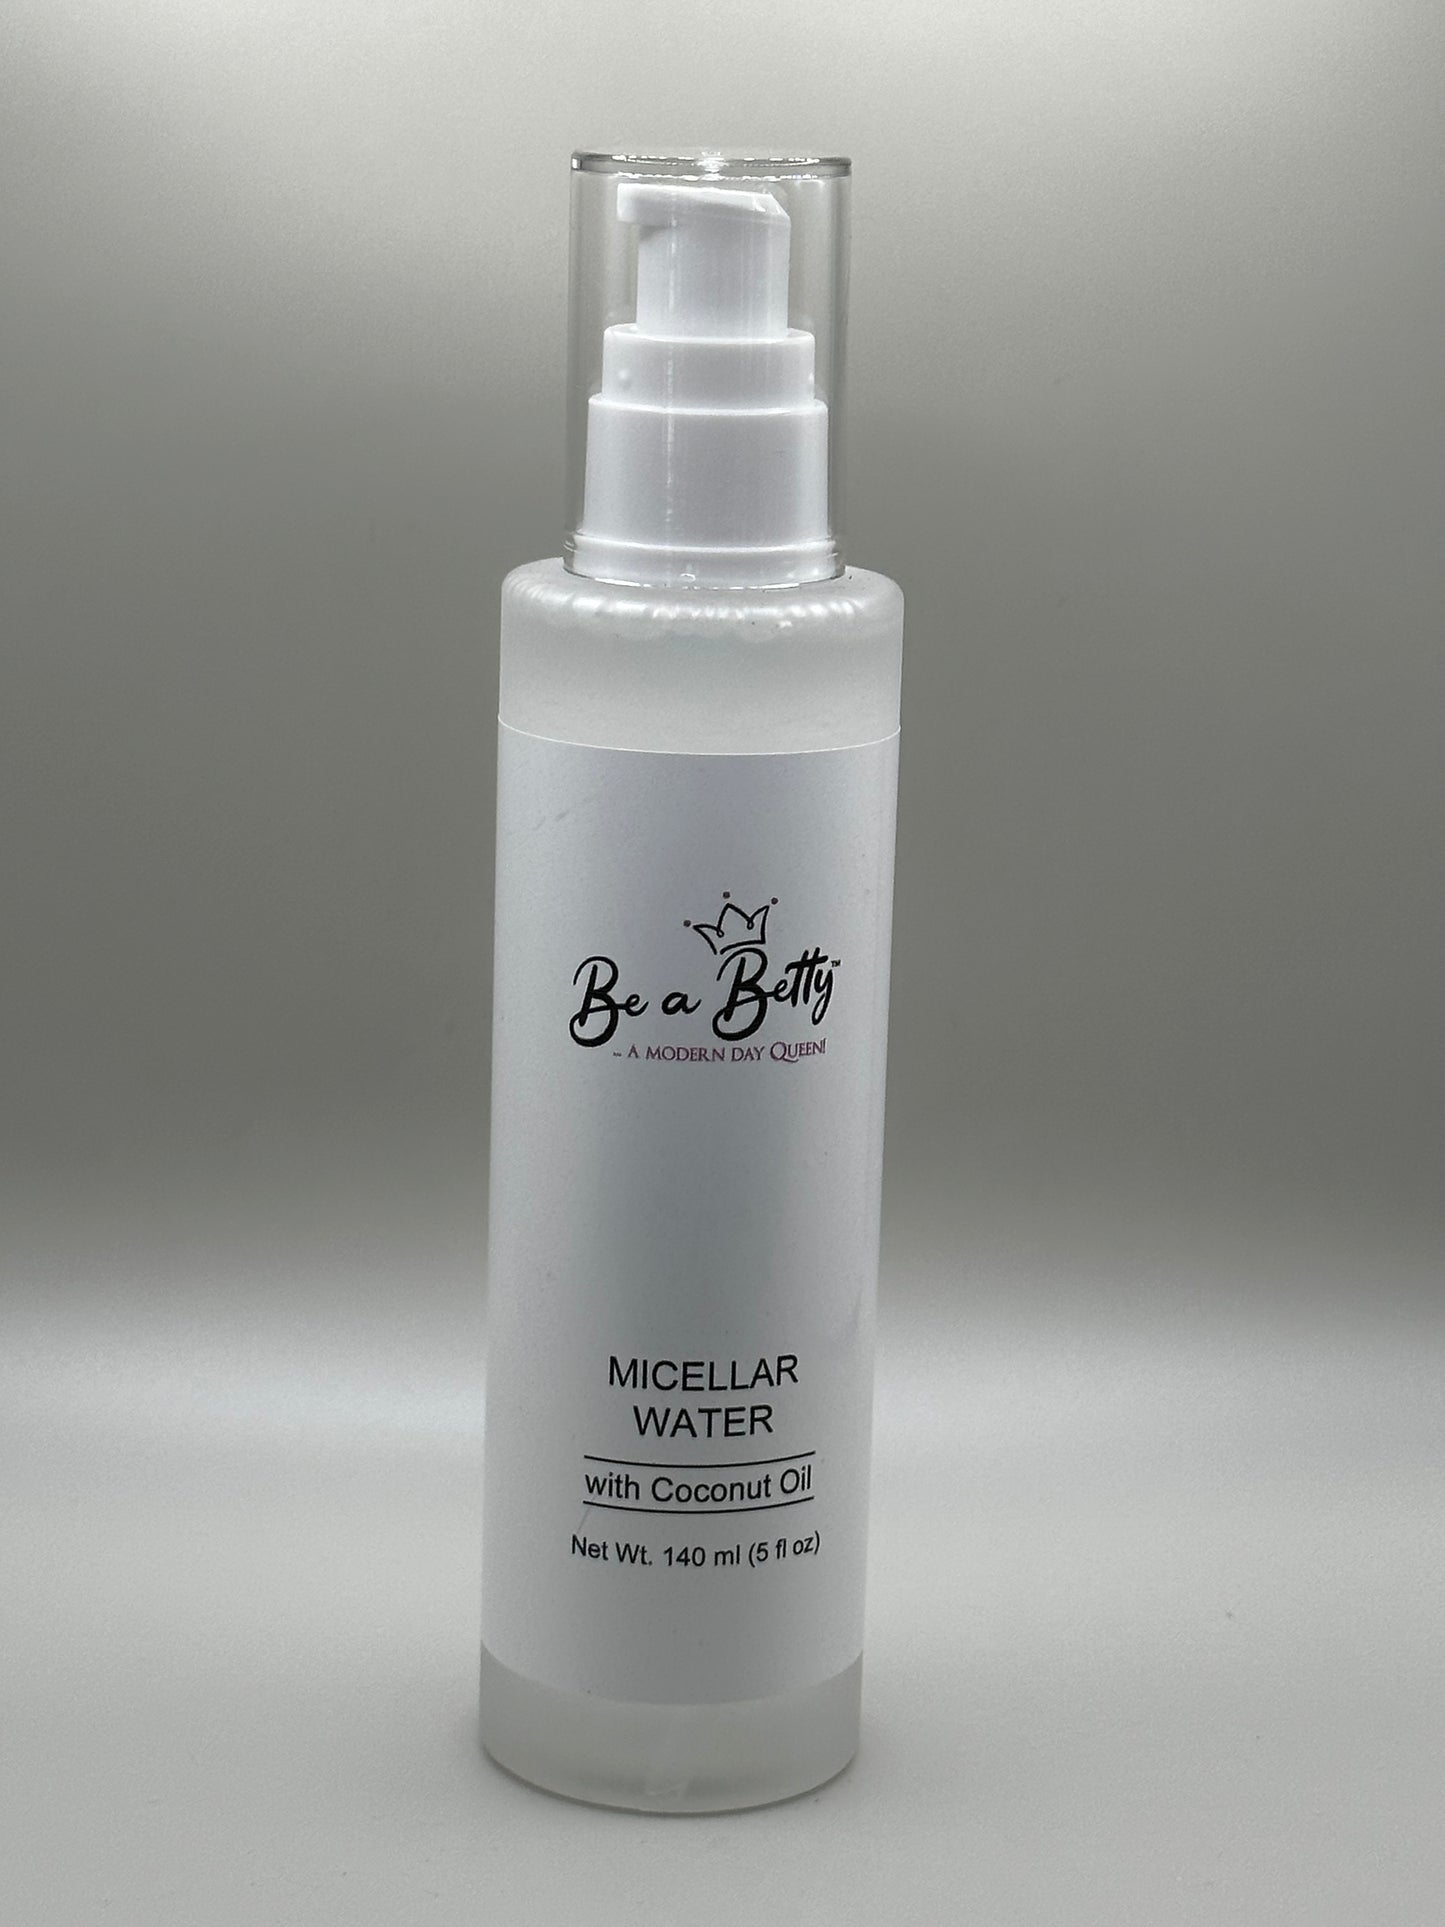 Micellar Water with Coconut Oil